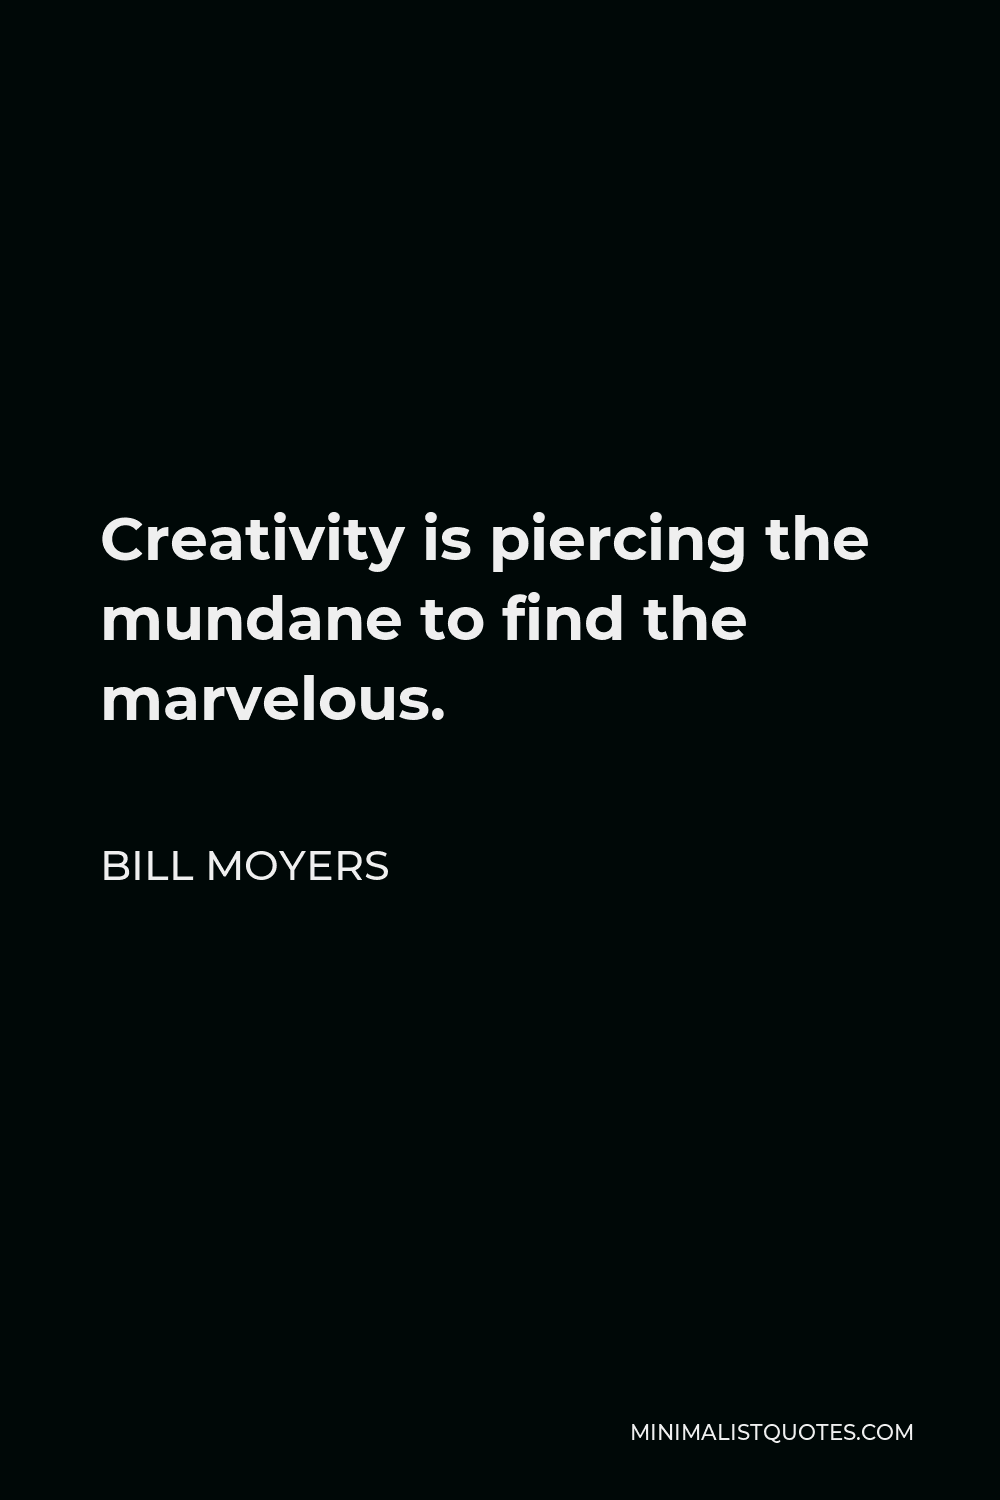 Bill Moyers Quote - Creativity is piercing the mundane to find the marvelous.